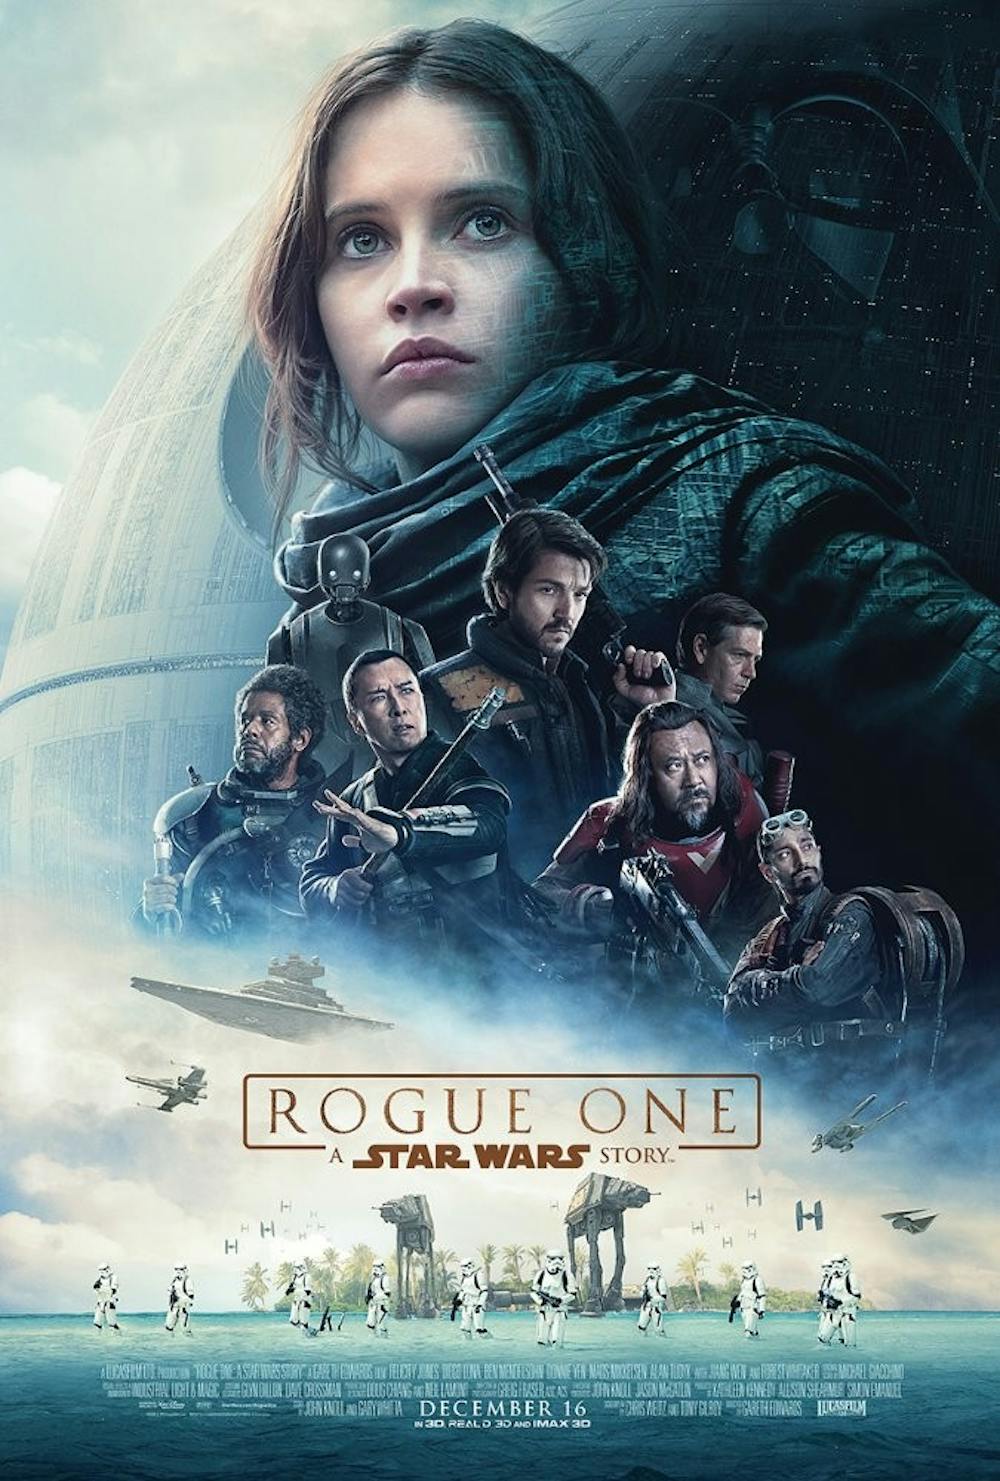 <p>“Rogue One: A Star Wars Story” is a bit of a rogue itself as it fits into the Star Wars franchise.</p>